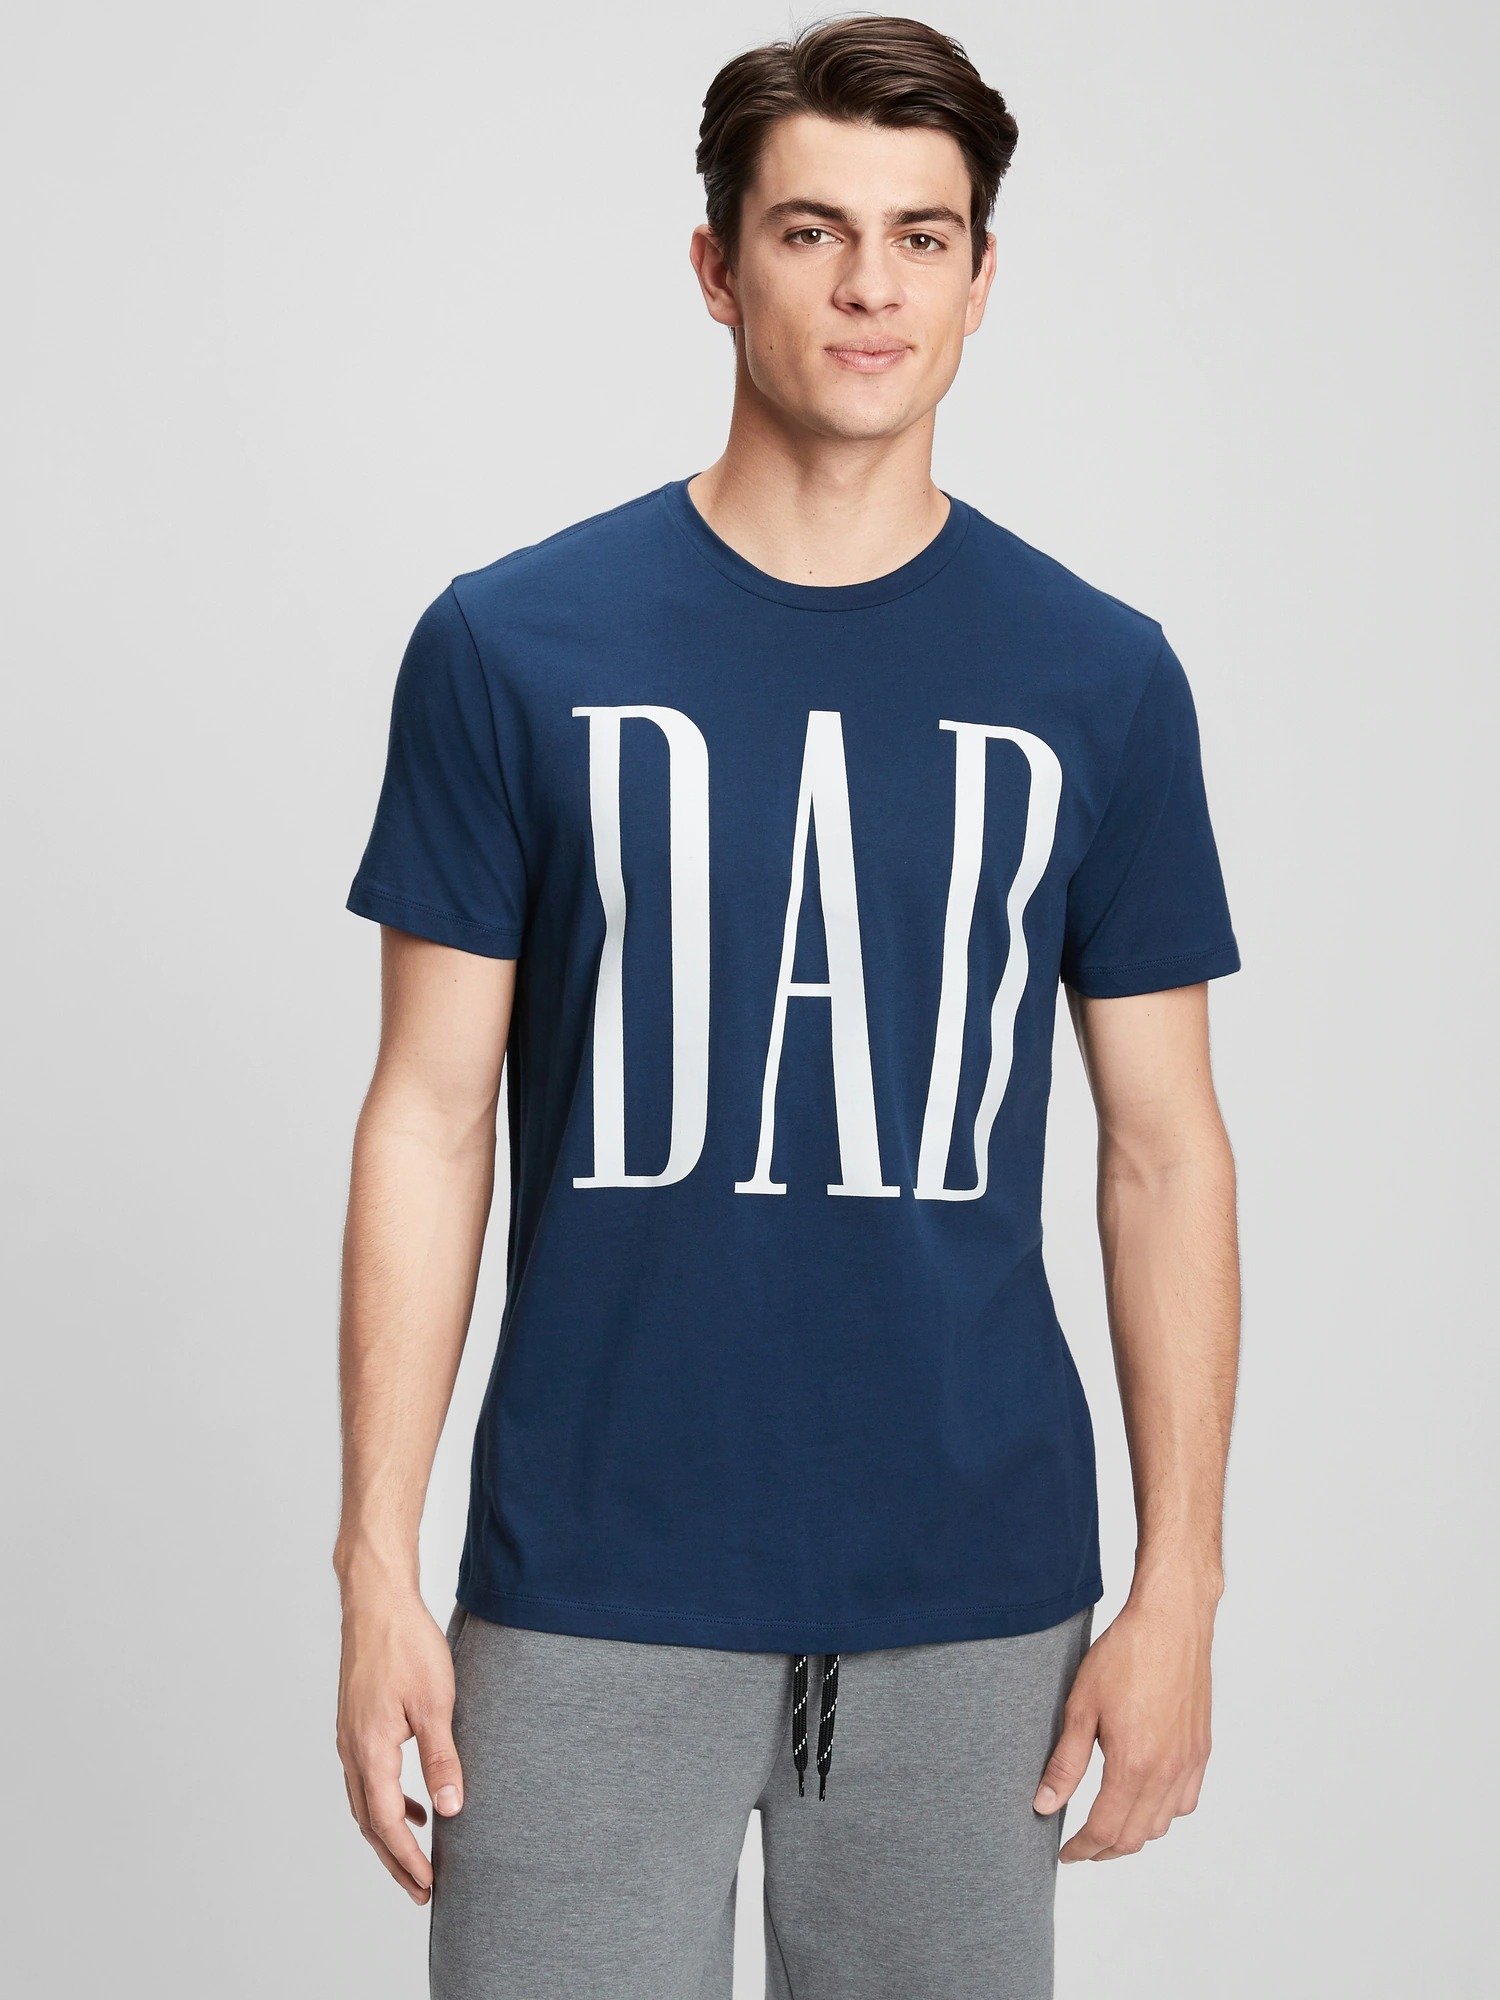 Dad Graphic T-Shirt product image